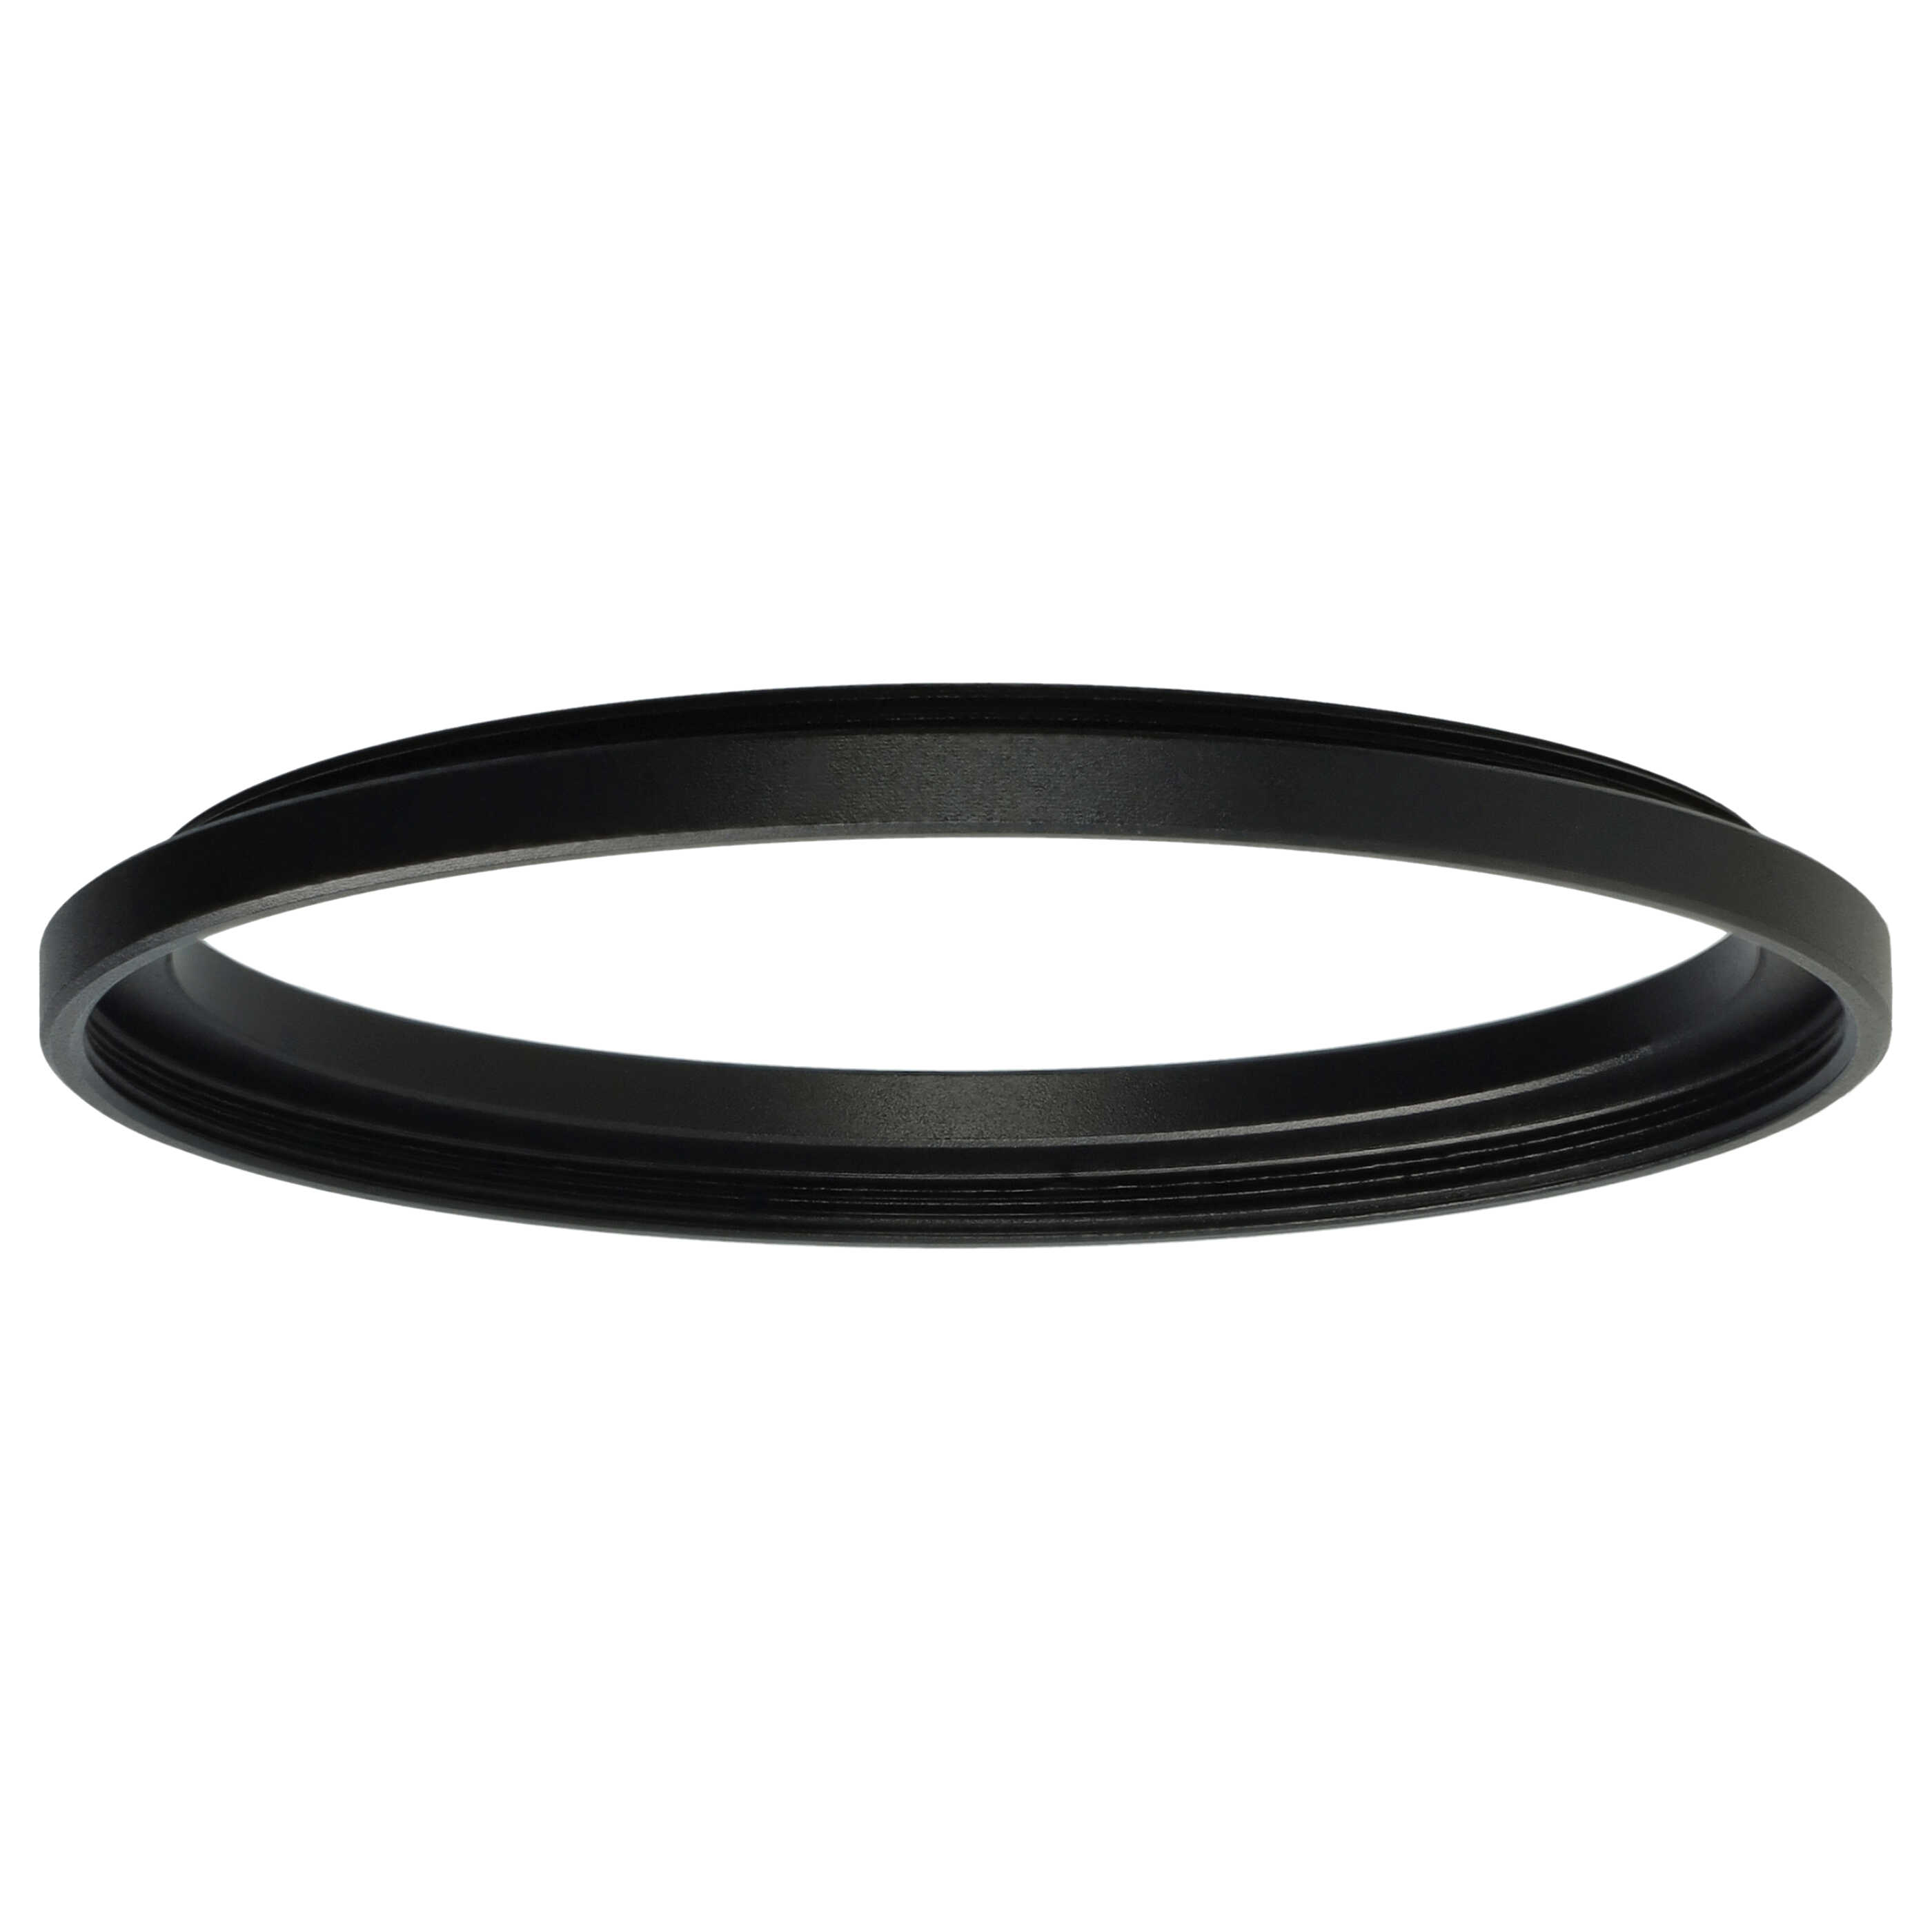 Step-Up Ring Adapter of 58 mm to 62 mmfor various Camera Lens - Filter Adapter